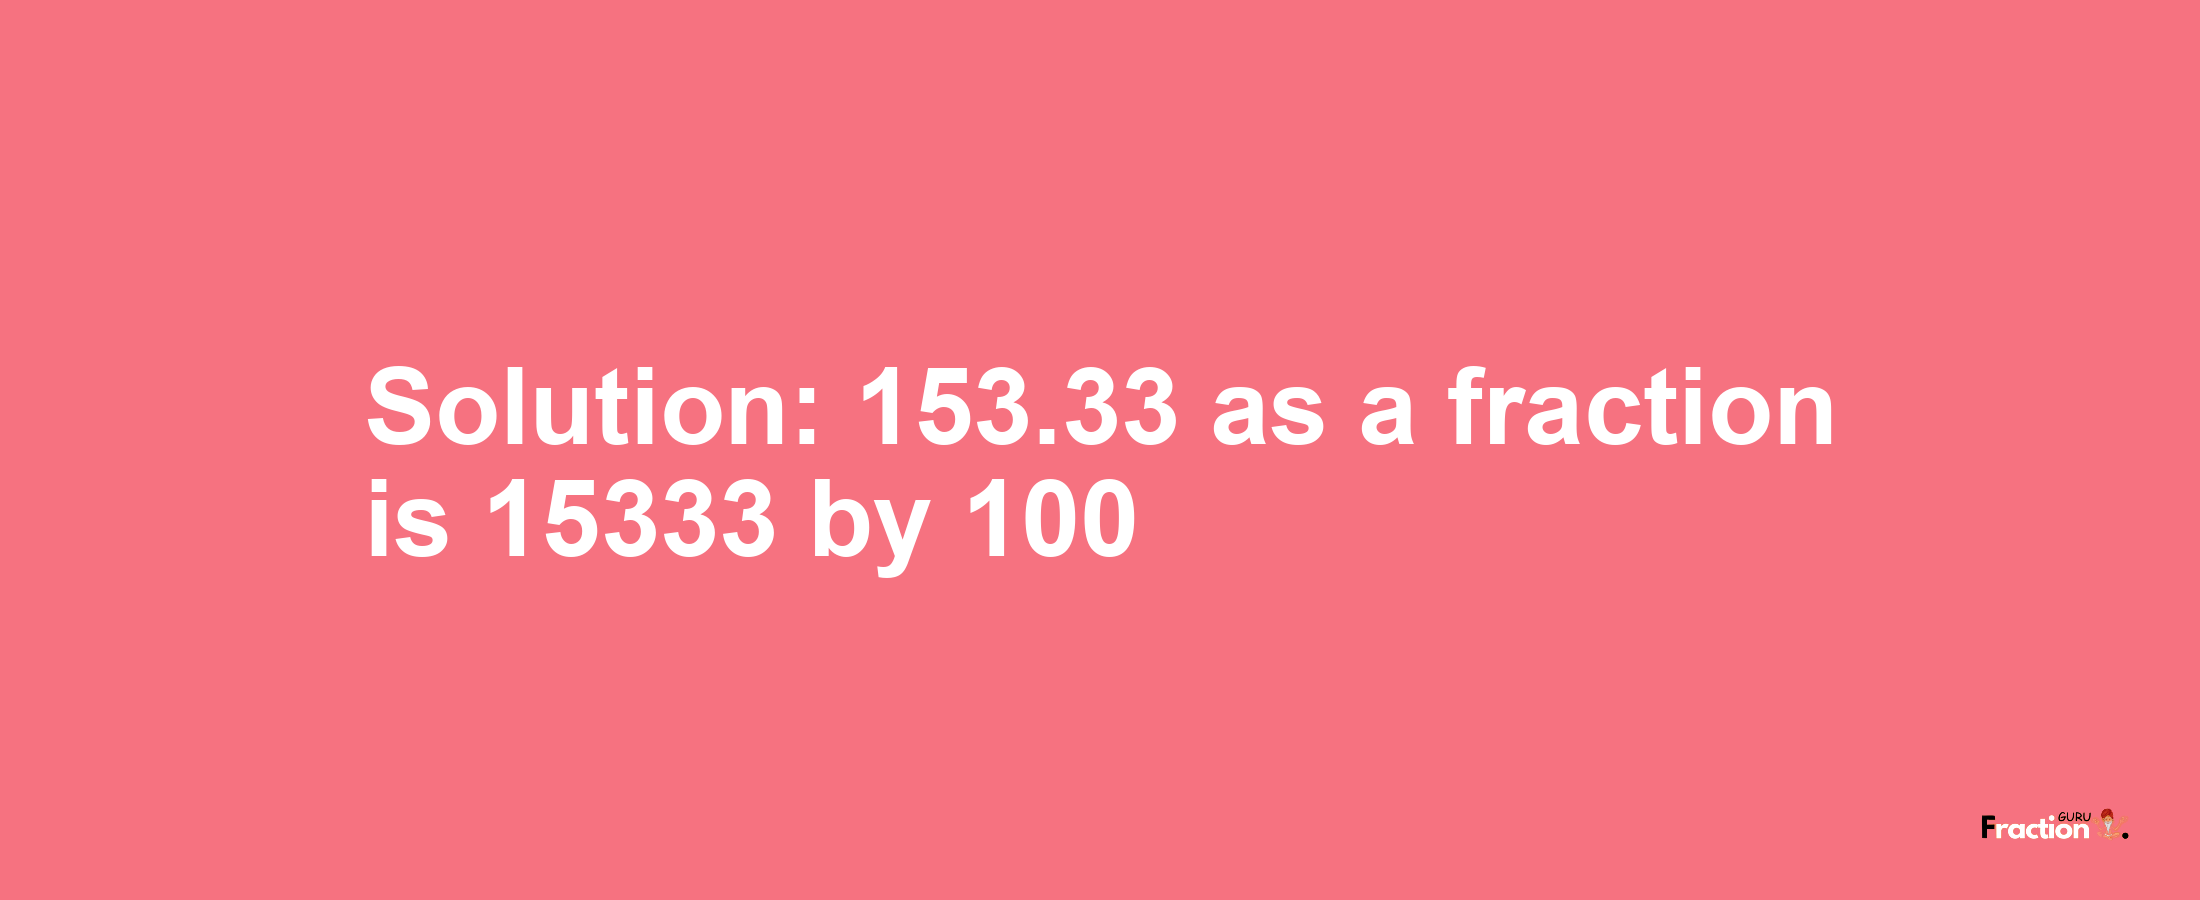 Solution:153.33 as a fraction is 15333/100